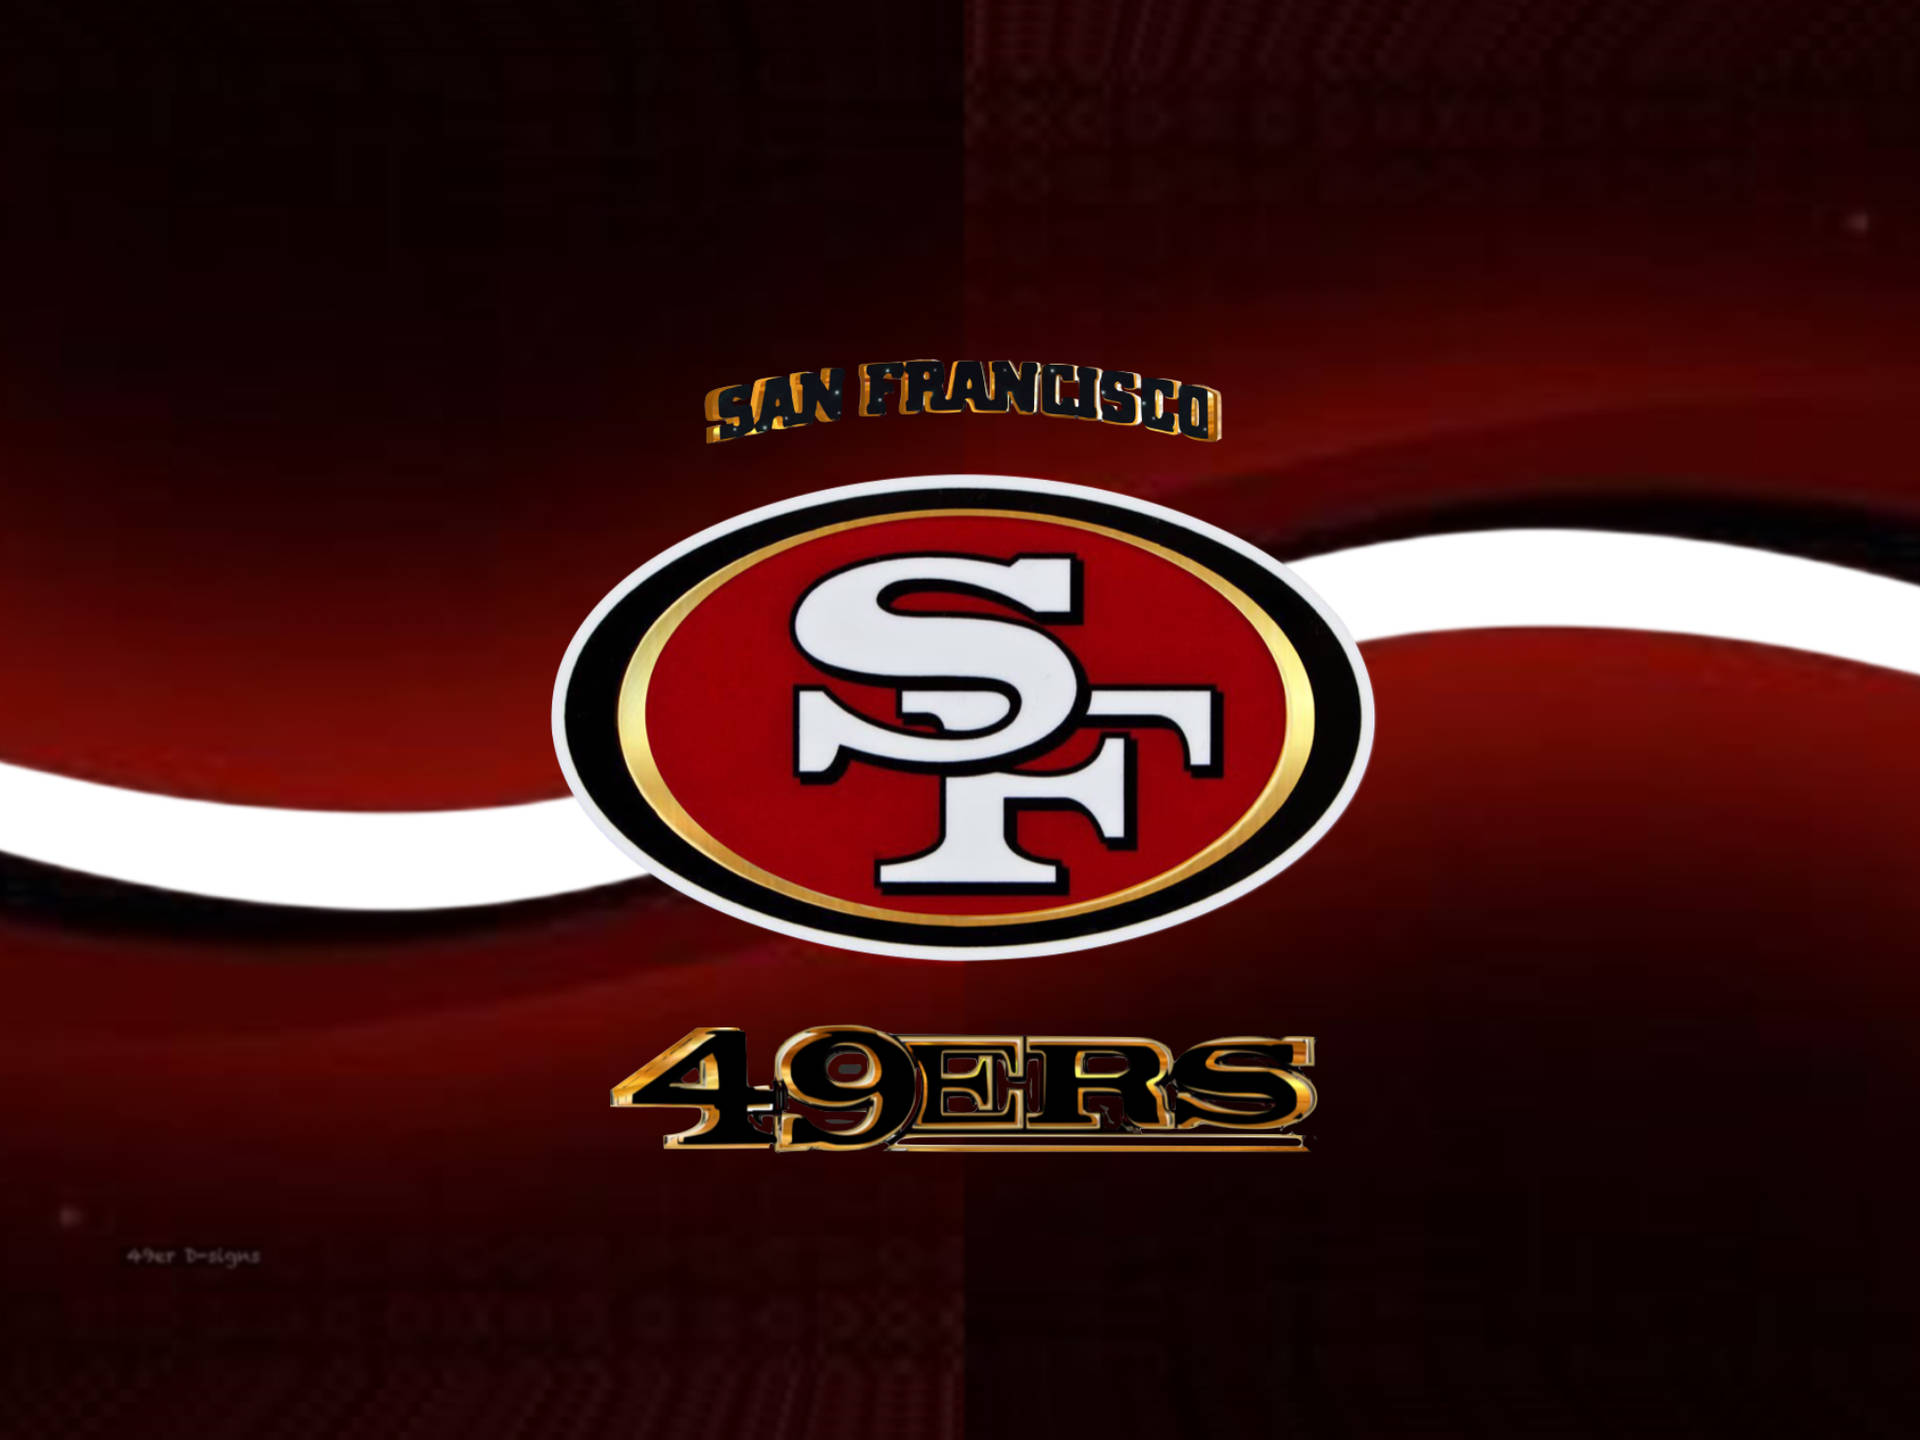 Spirited 49ers Fans Cheering In A Packed Stadium For Their Favorite Team